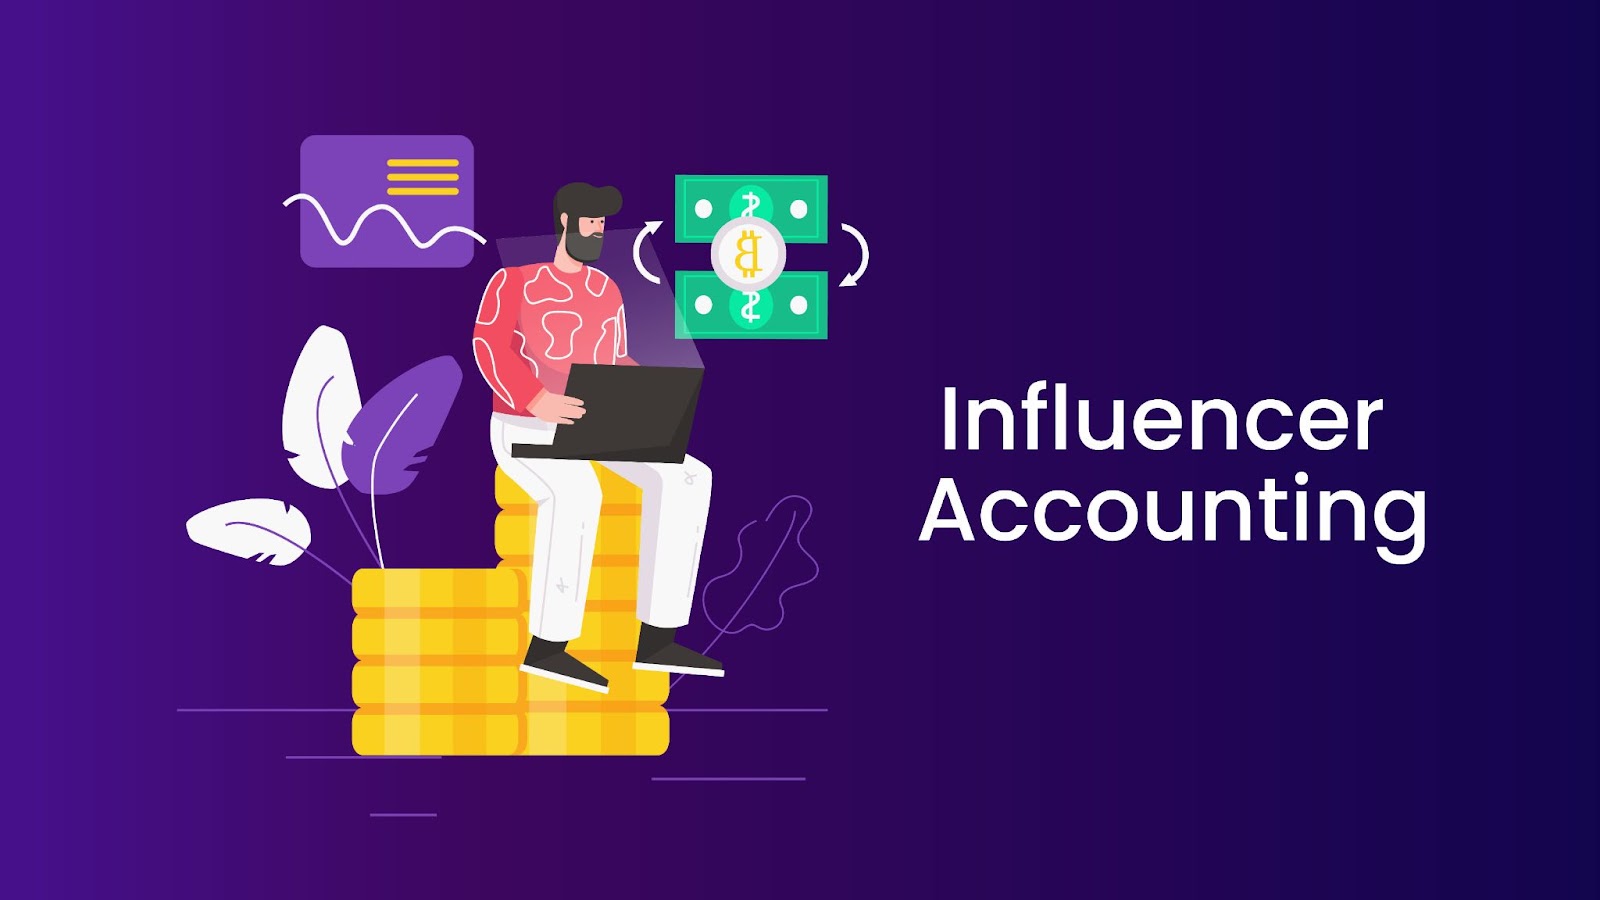 Influencer Accounting